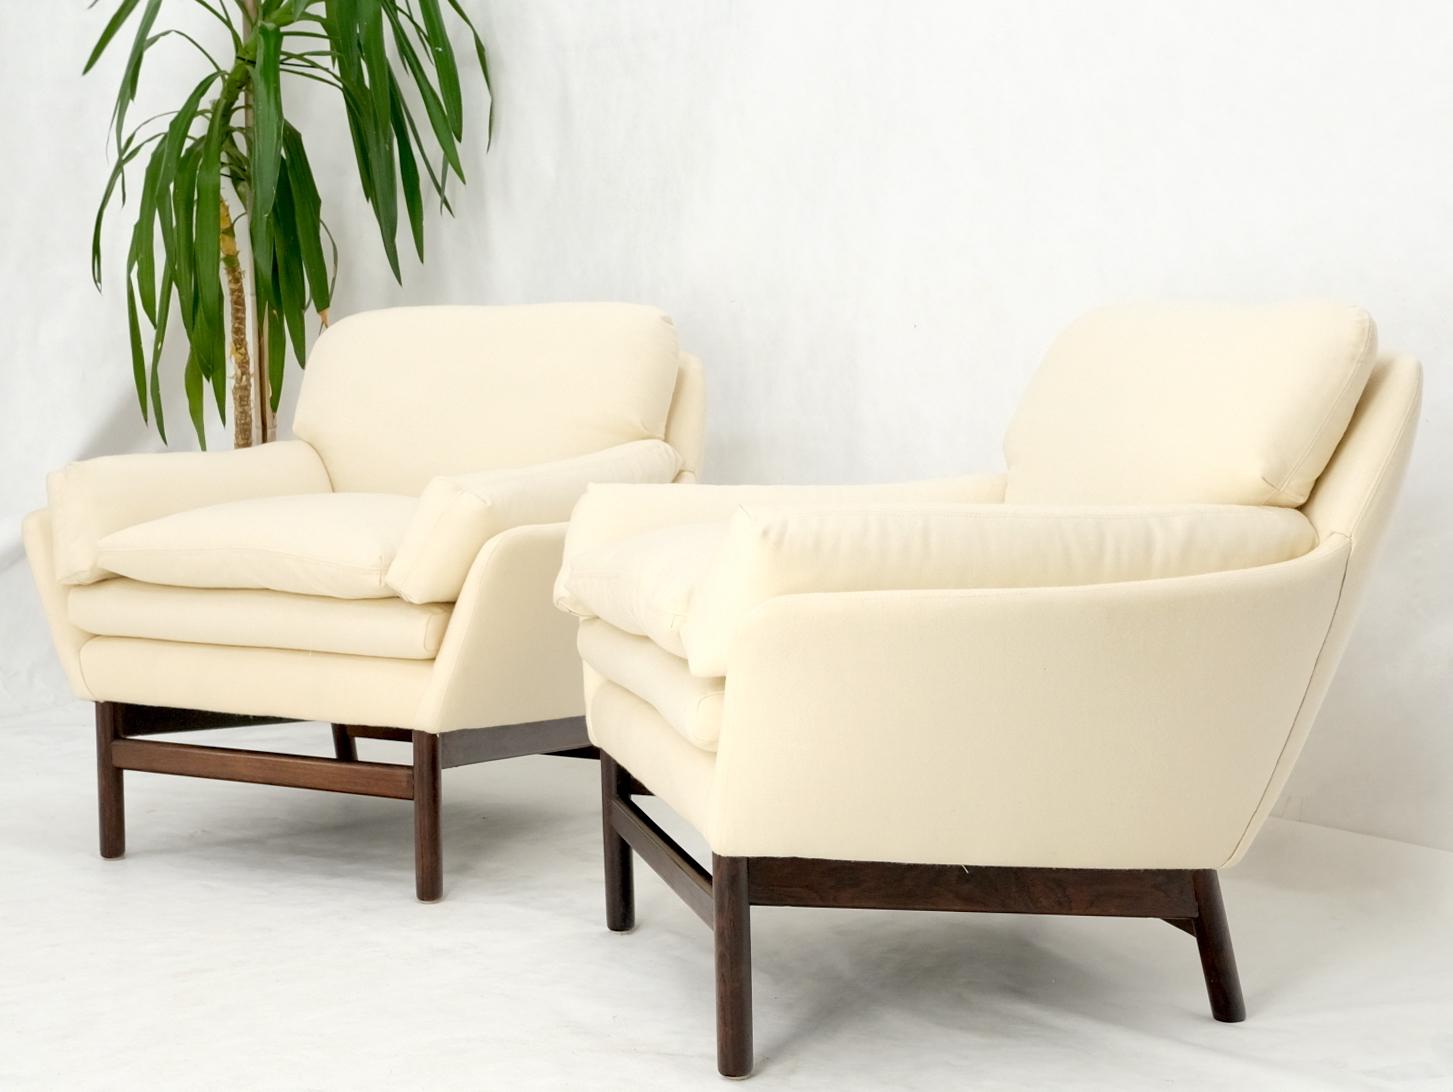 20th Century Solid Rosewood Dowel Shape Legs New Soft Wool Upholstery Danish Lounge Chairs For Sale